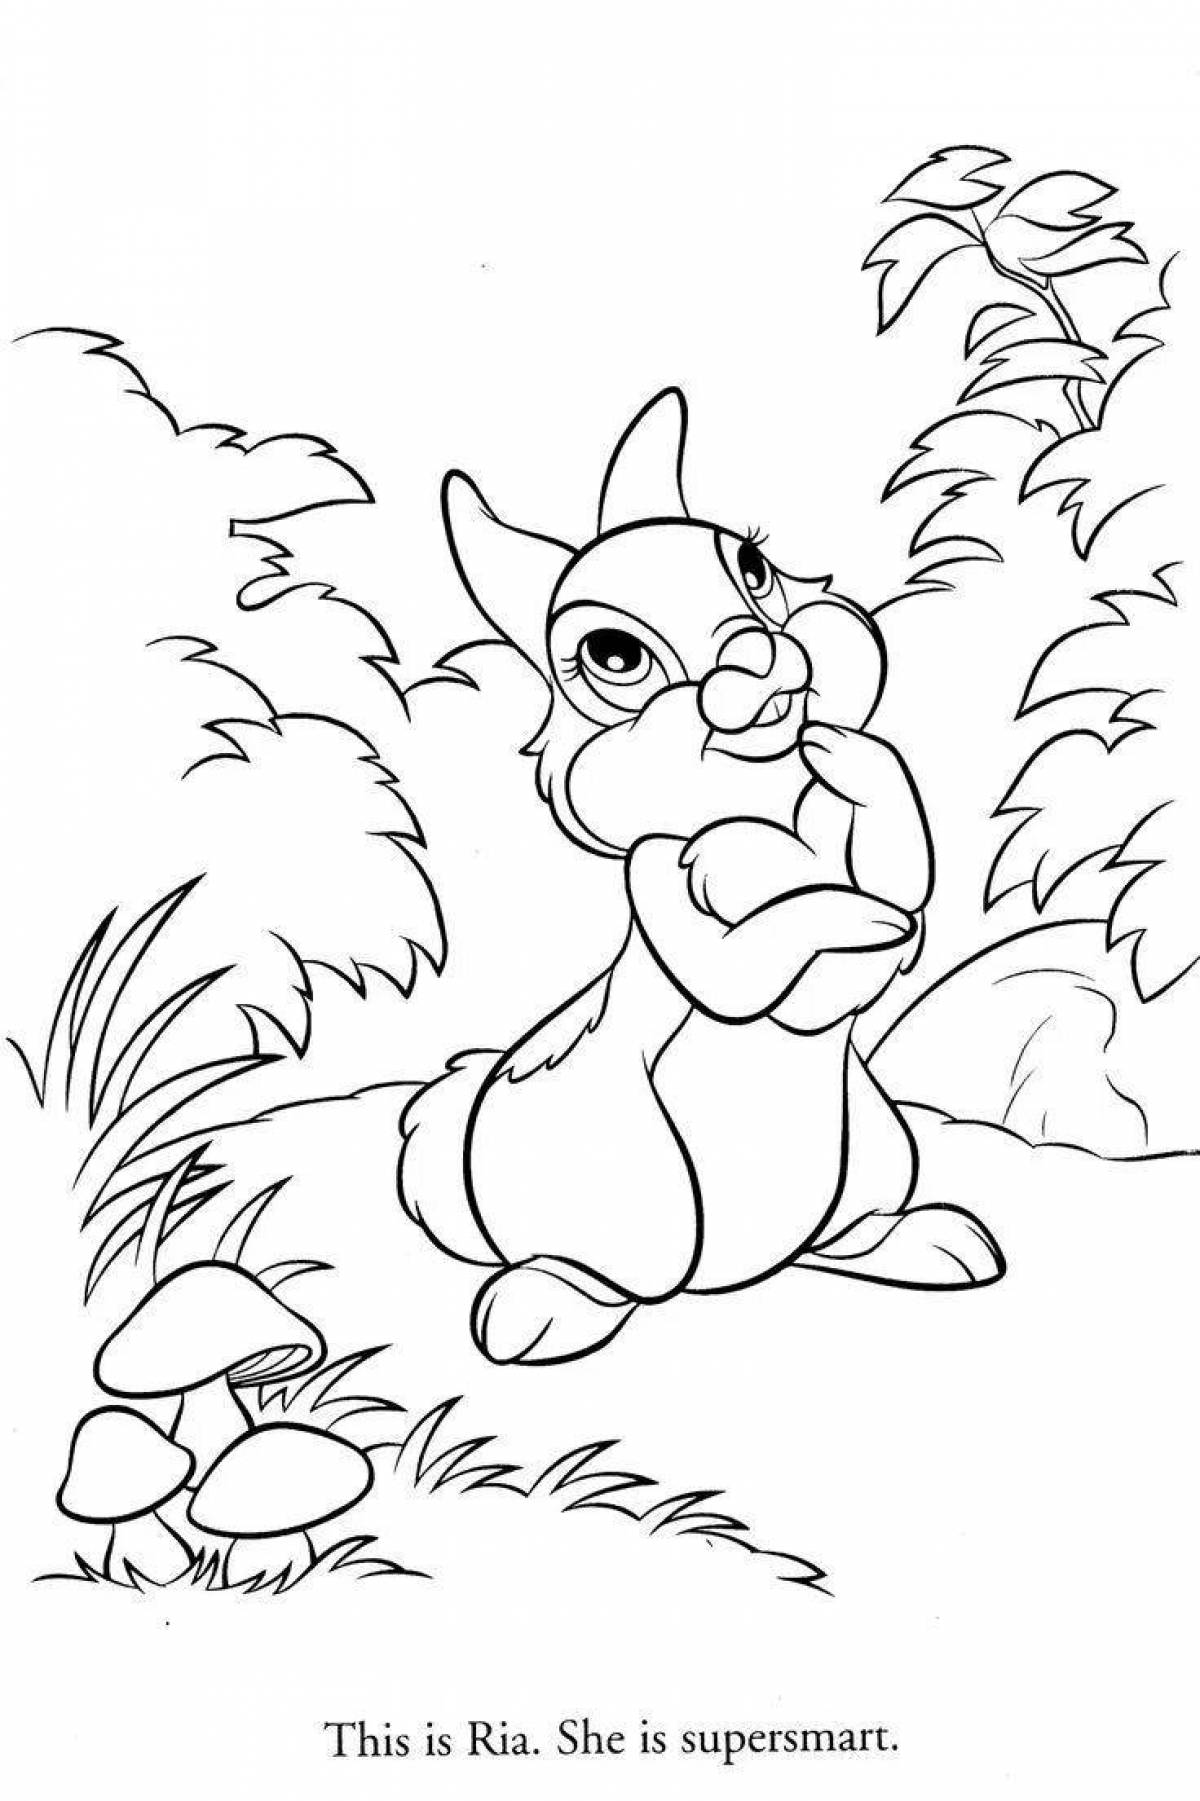 Animated rabbit and squirrel coloring book